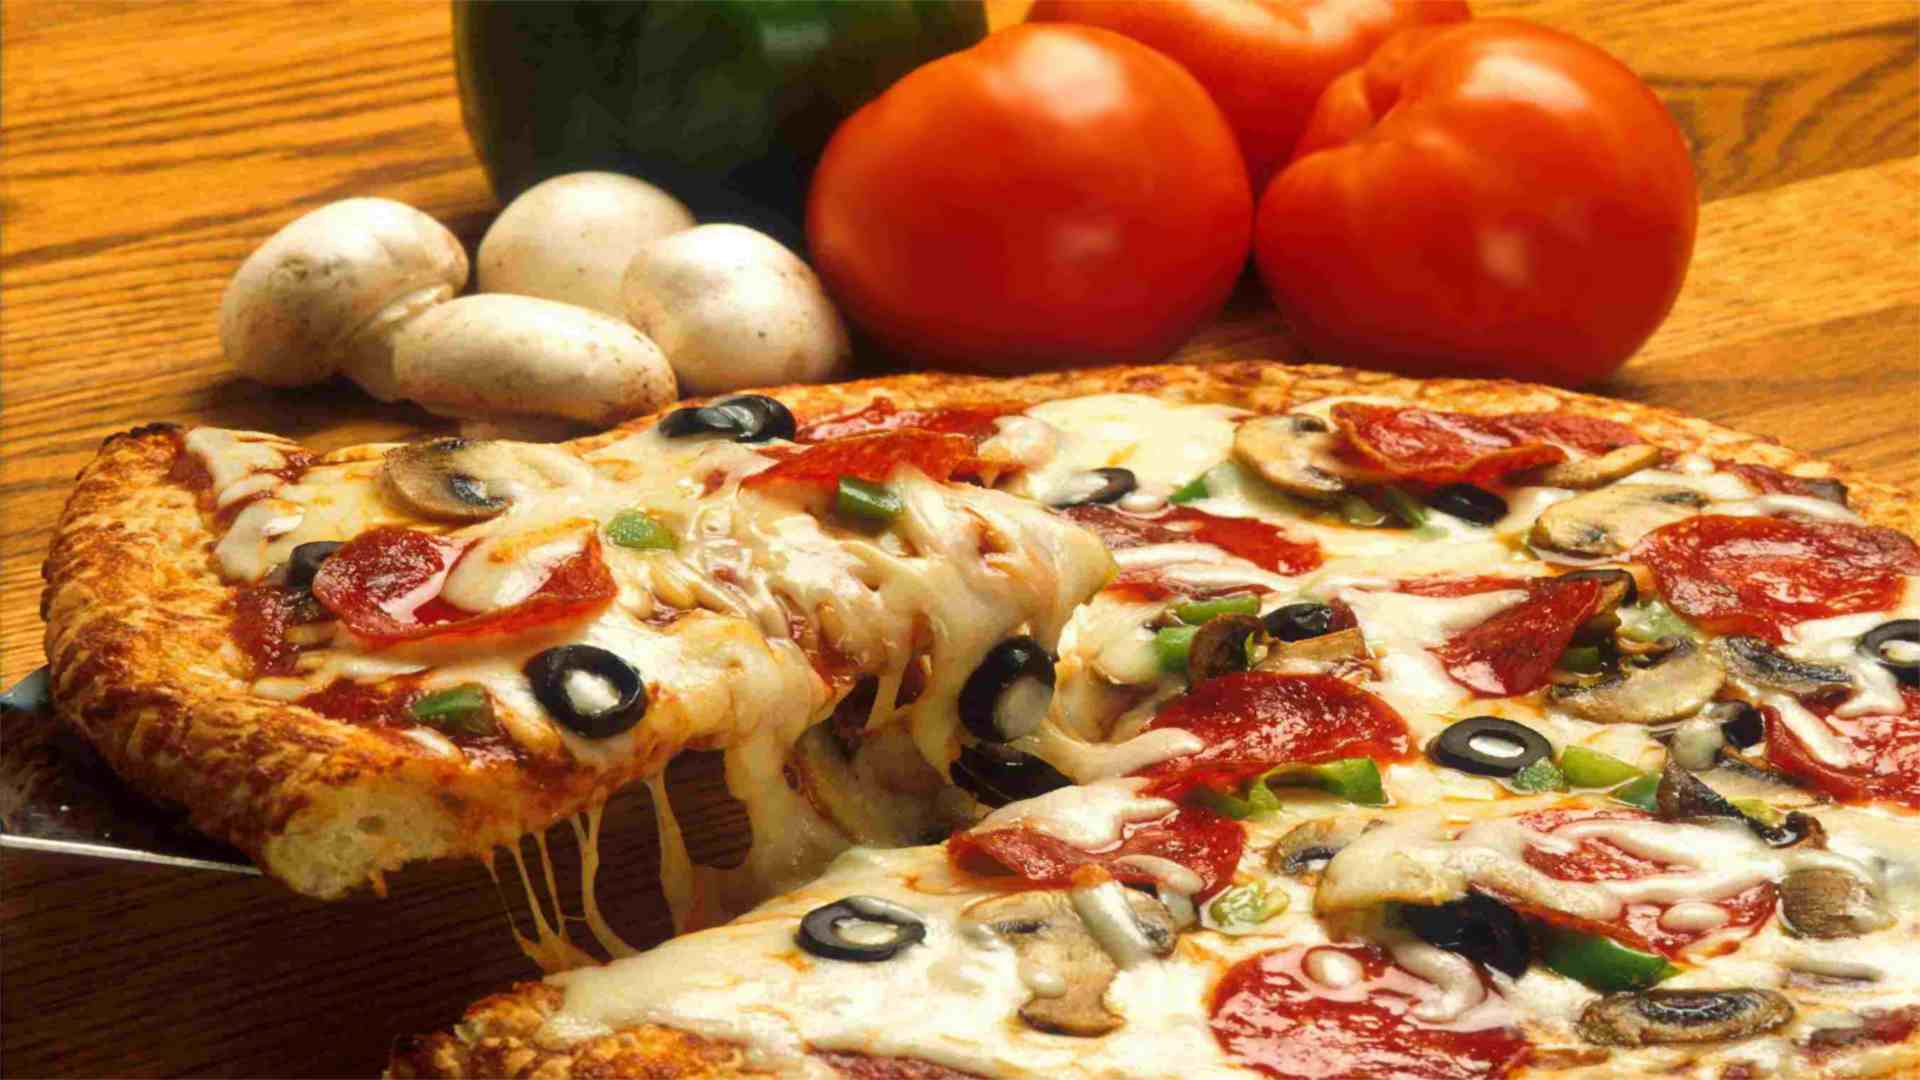 An Image of a Pizza with lots of different toppings, it look delicious!!